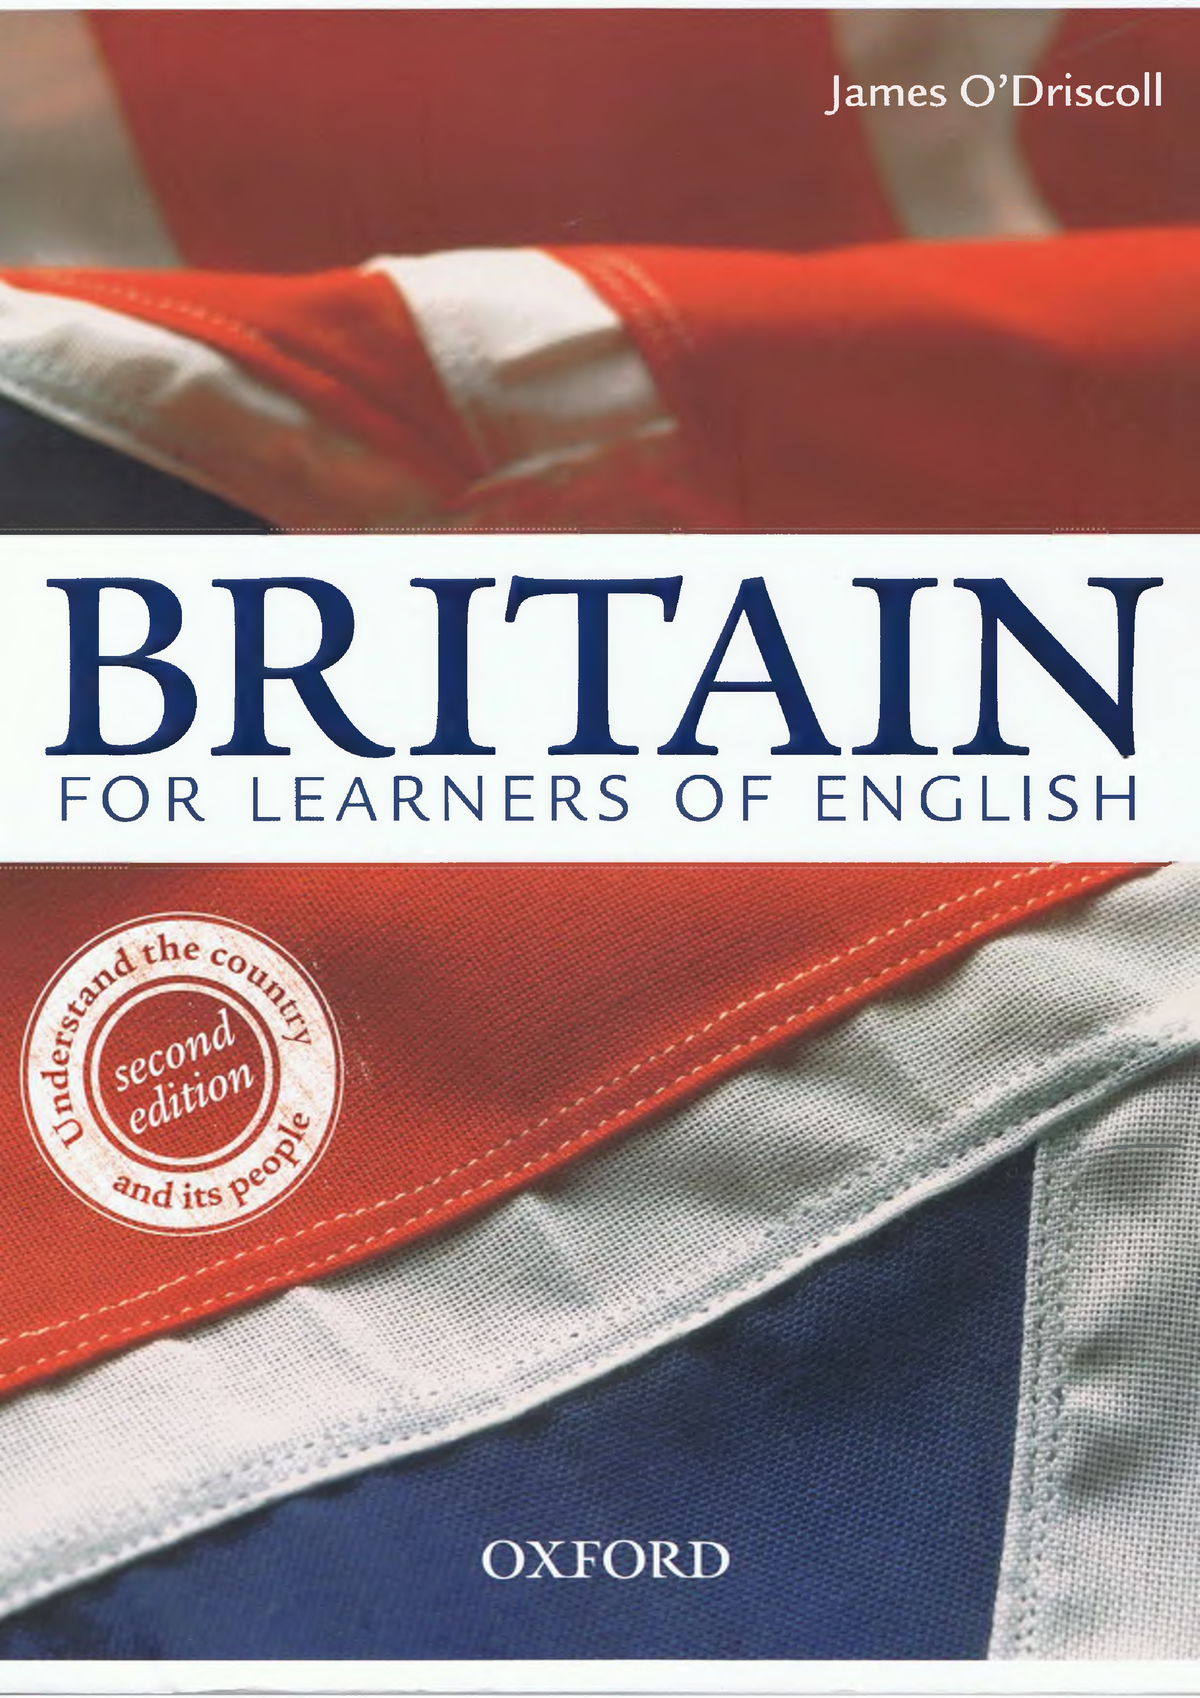 Britain country and people. James o Driscoll Britain. Britain for Learners of English Workbook. Britain the Country and its people James o'Driscoll купить. In Britain учебник.